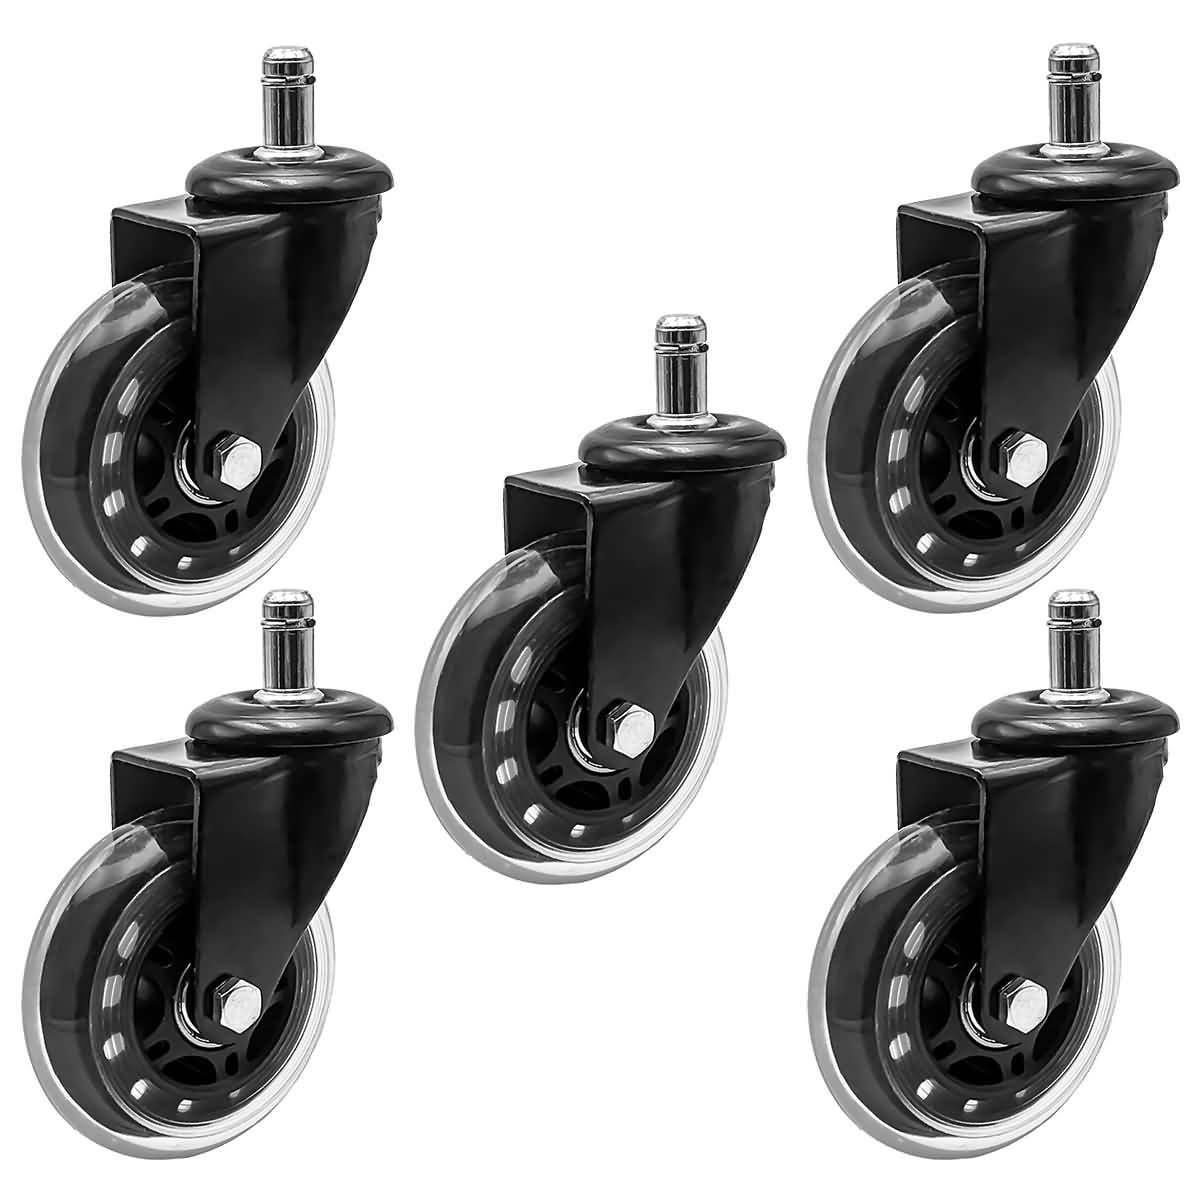 5-Pack Roller Office Desk Chair Casters 7/16" Replacement Wheels for All Floors 